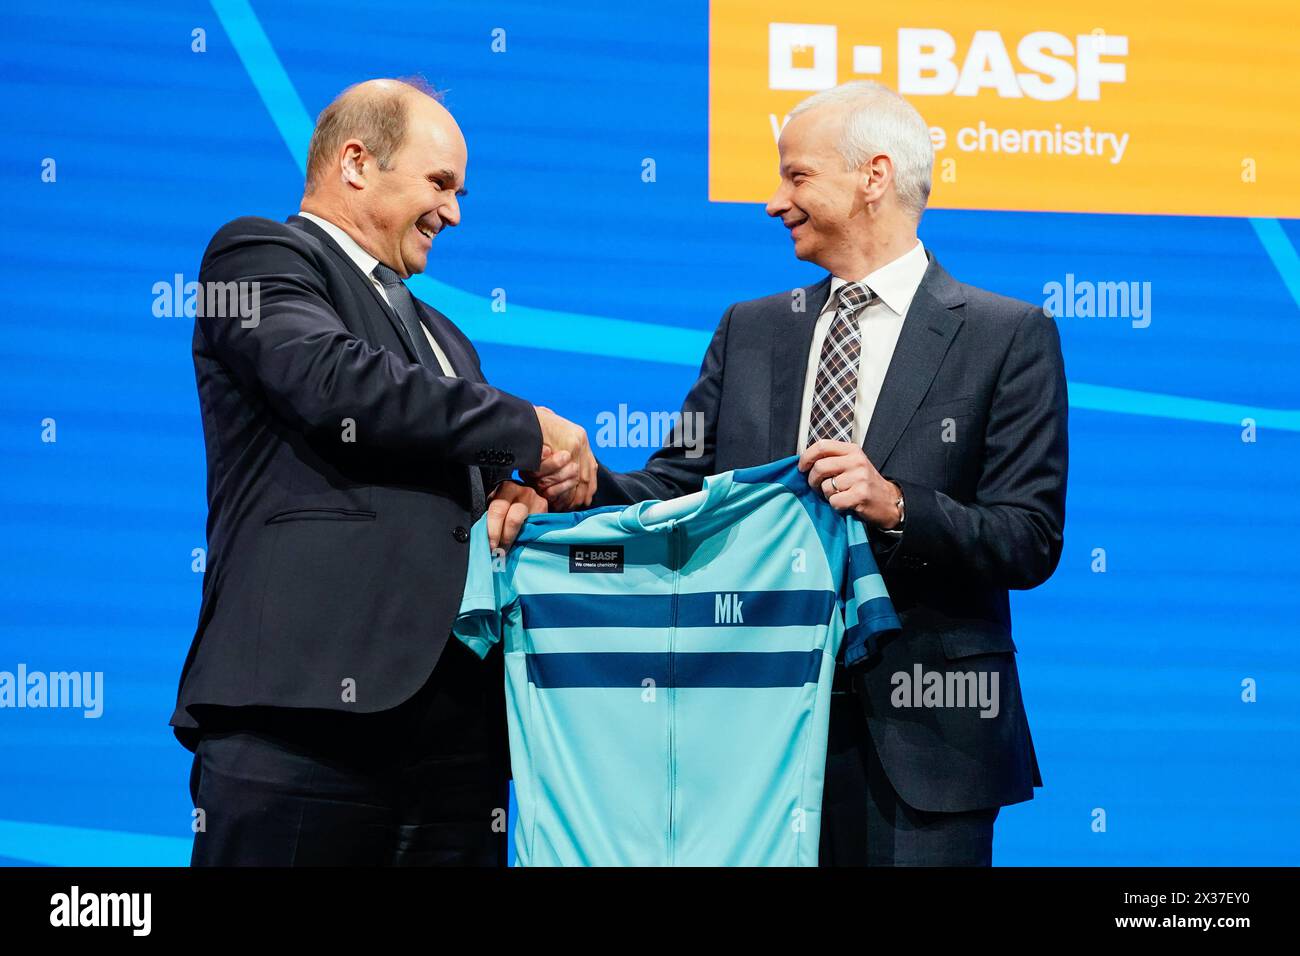 Mannheim, Germany. 25th Apr, 2024. Martin Brudermüller (l), Chairman of the Board of Executive Directors of BASF SE, hands over a cycling jersey to Markus Kamieth, future Chairman of the Board of Executive Directors of BASF SE, at the Annual Meeting of the chemical company BASF. It is the last shareholders' meeting of Chairman Brudermüller. Kamieth will take office at the end of the Annual Meeting. Credit: Uwe Anspach/dpa/Alamy Live News Stock Photo